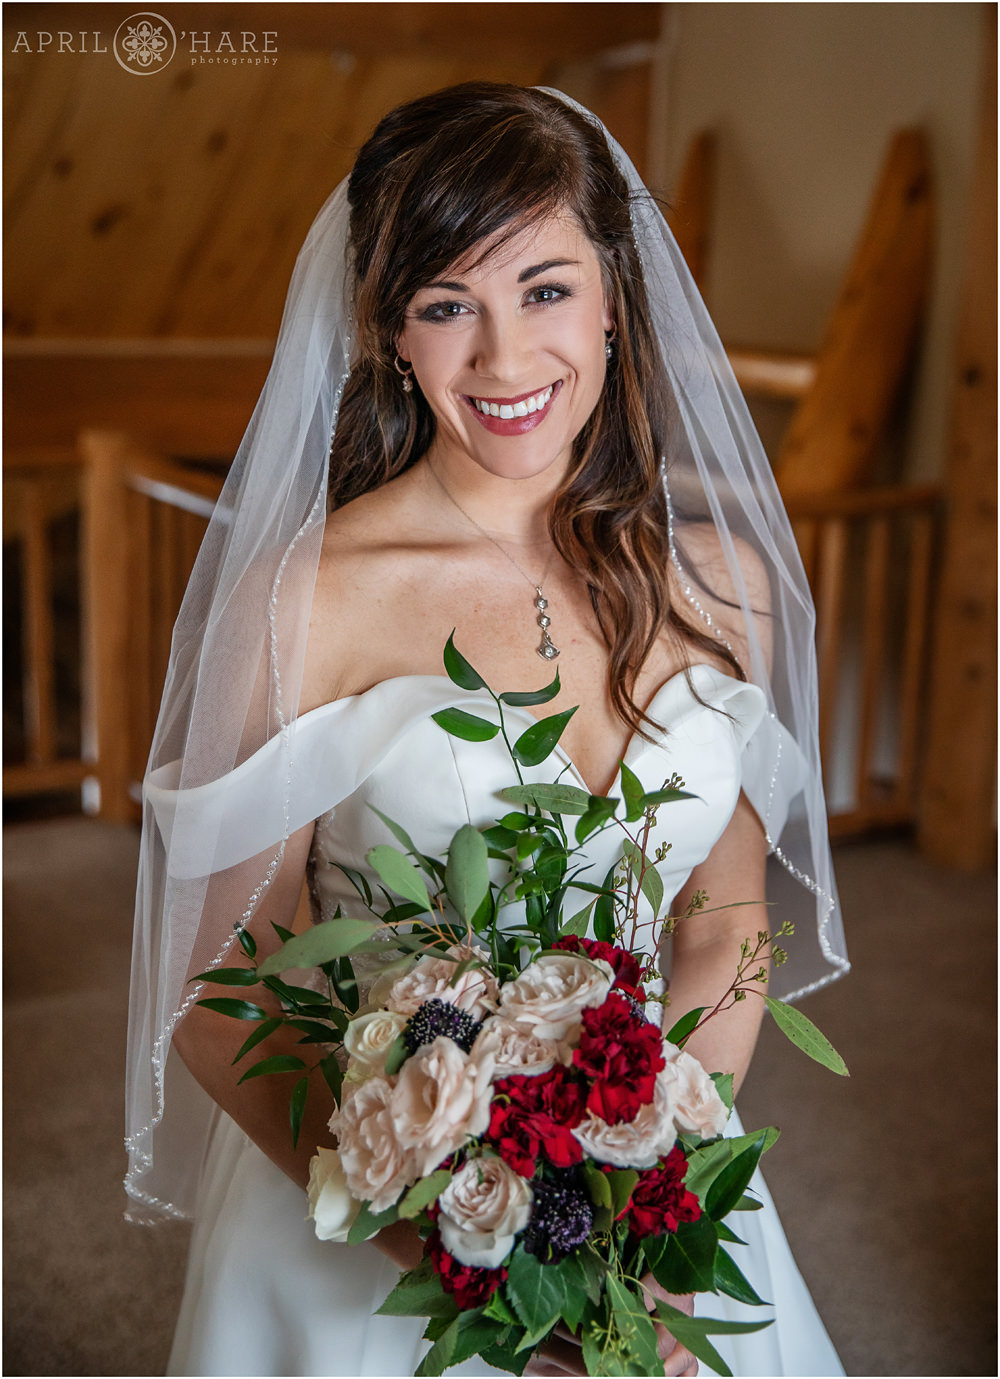 Classic bride portrait with window light at a private home in Keystone Colorado during winter